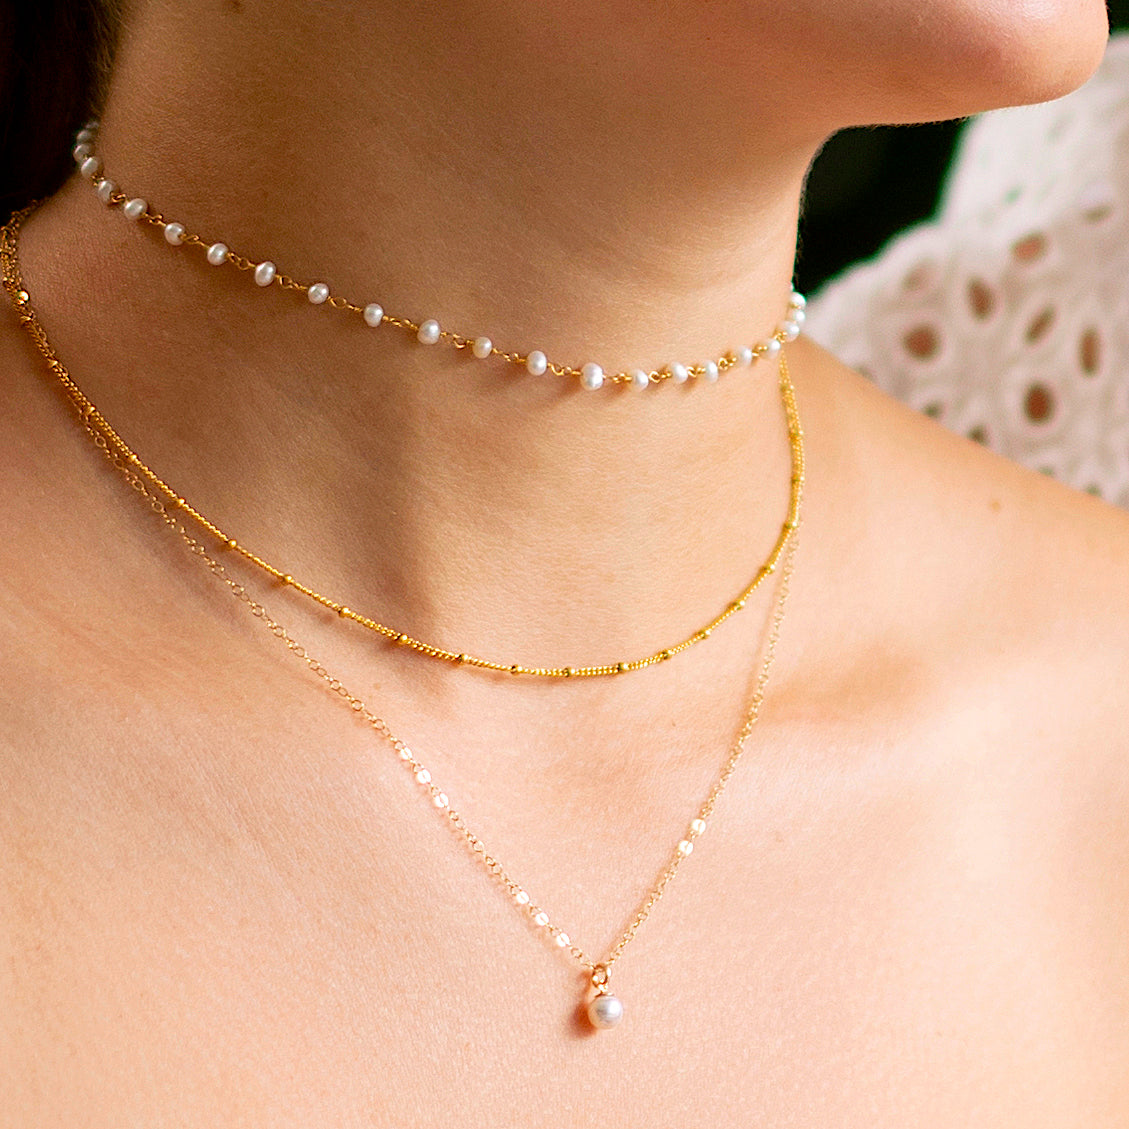 Buy Dainty Gold Pearl Necklace Small Pearl Pendant Pearl Gift Online in  India 